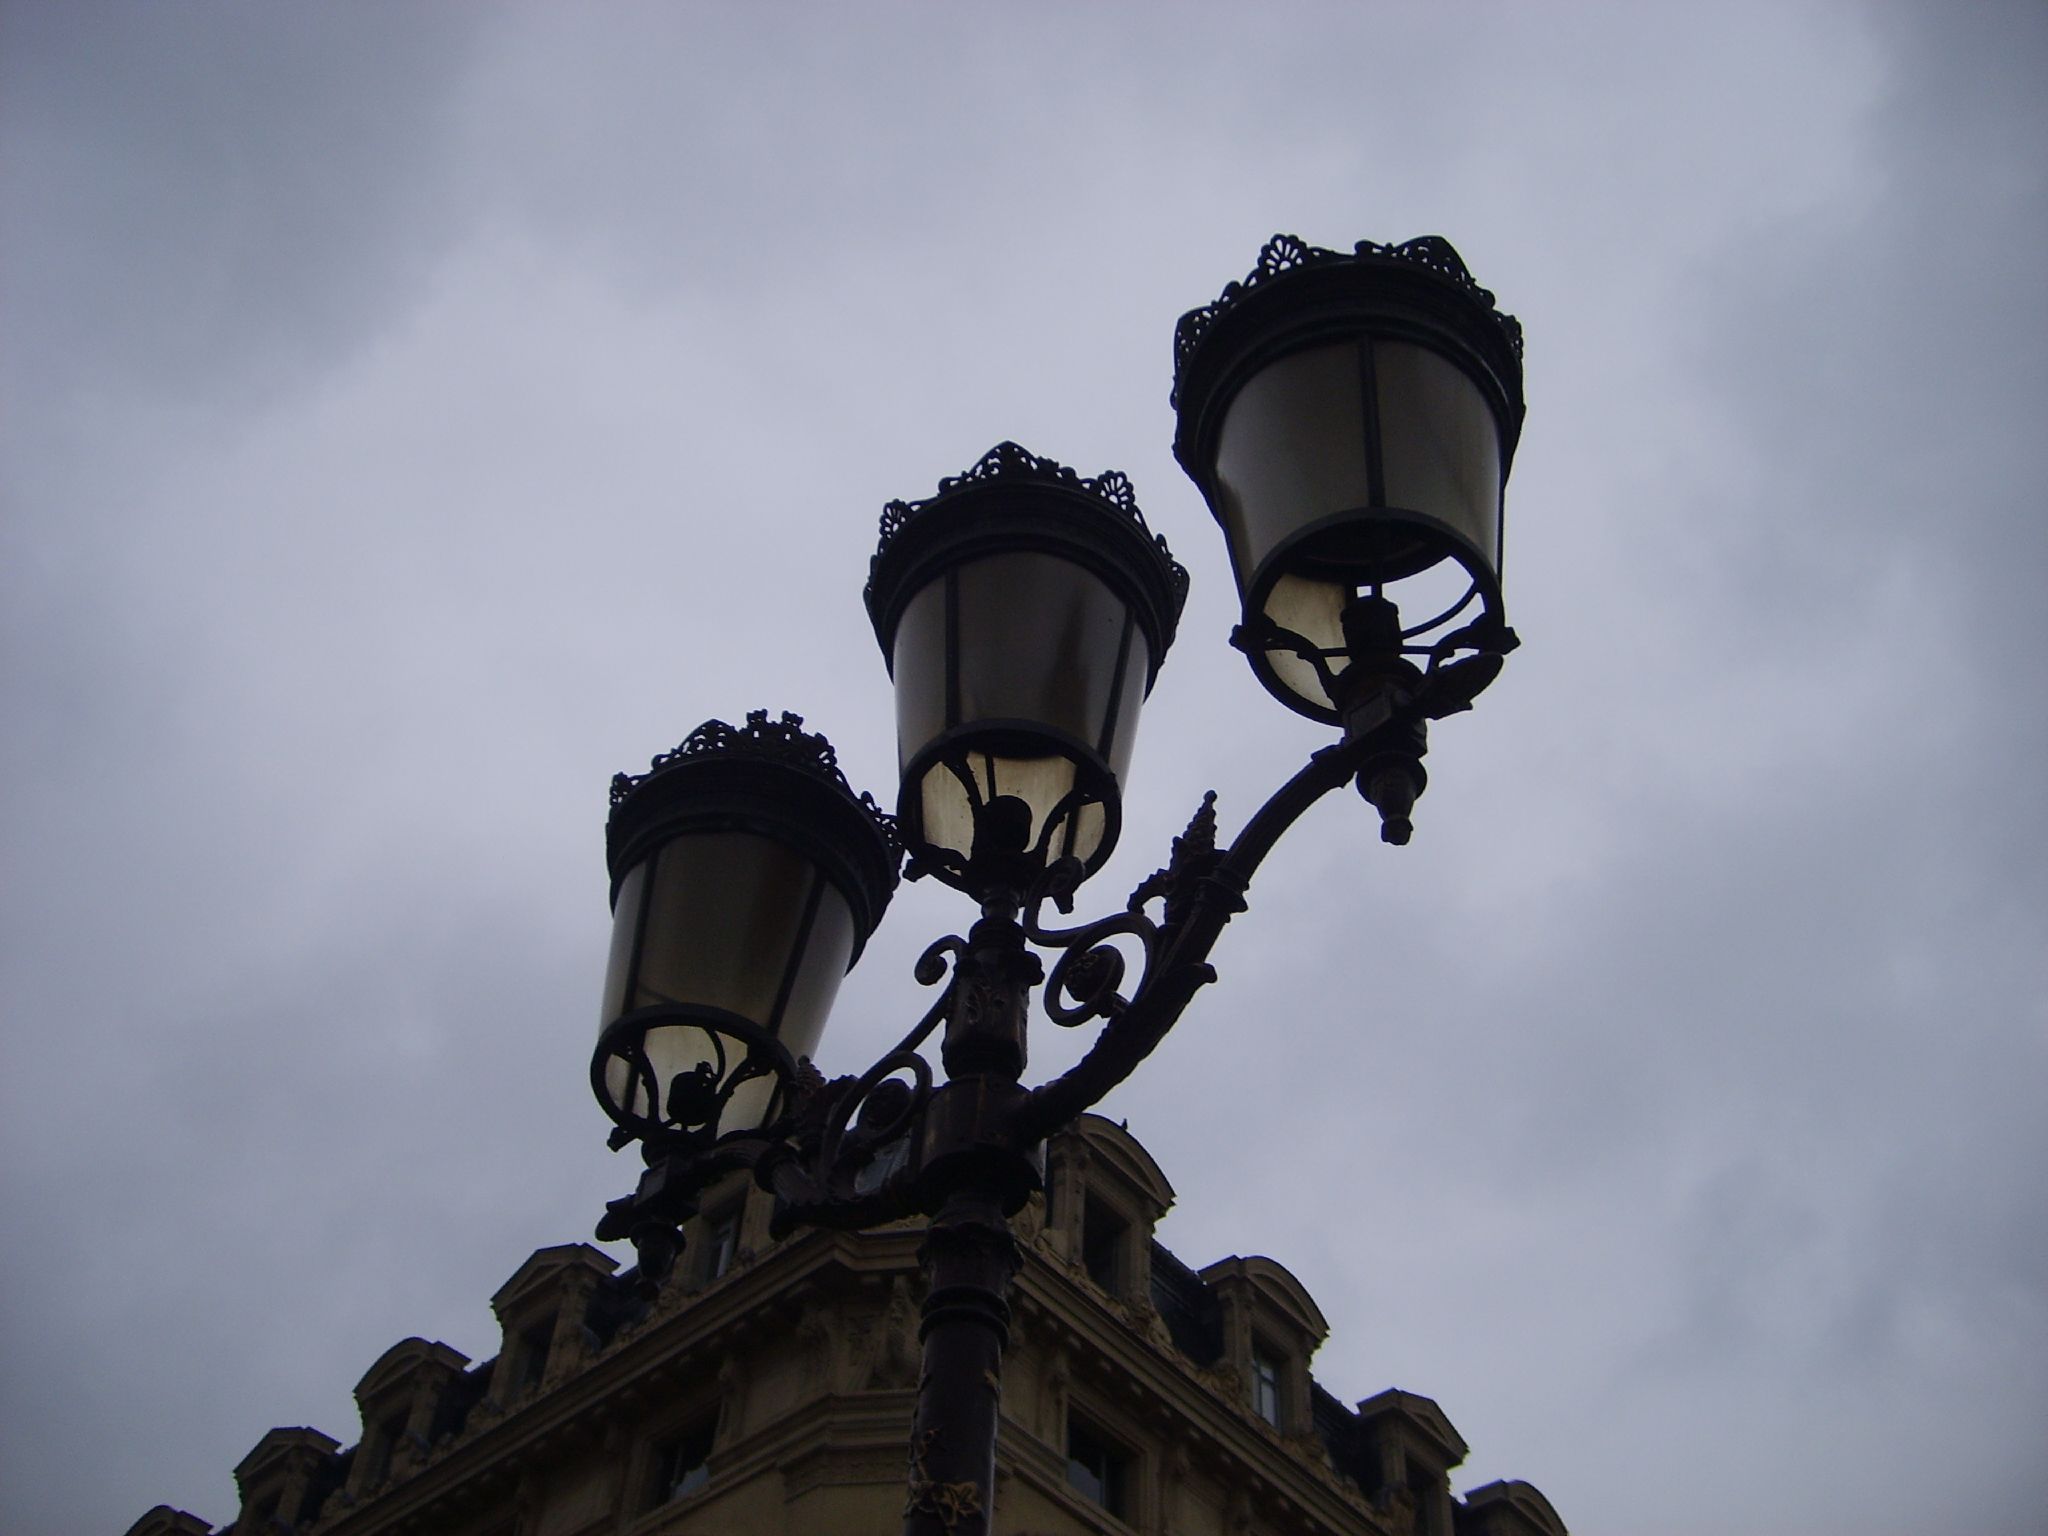 street lights with cloudy sky in the background